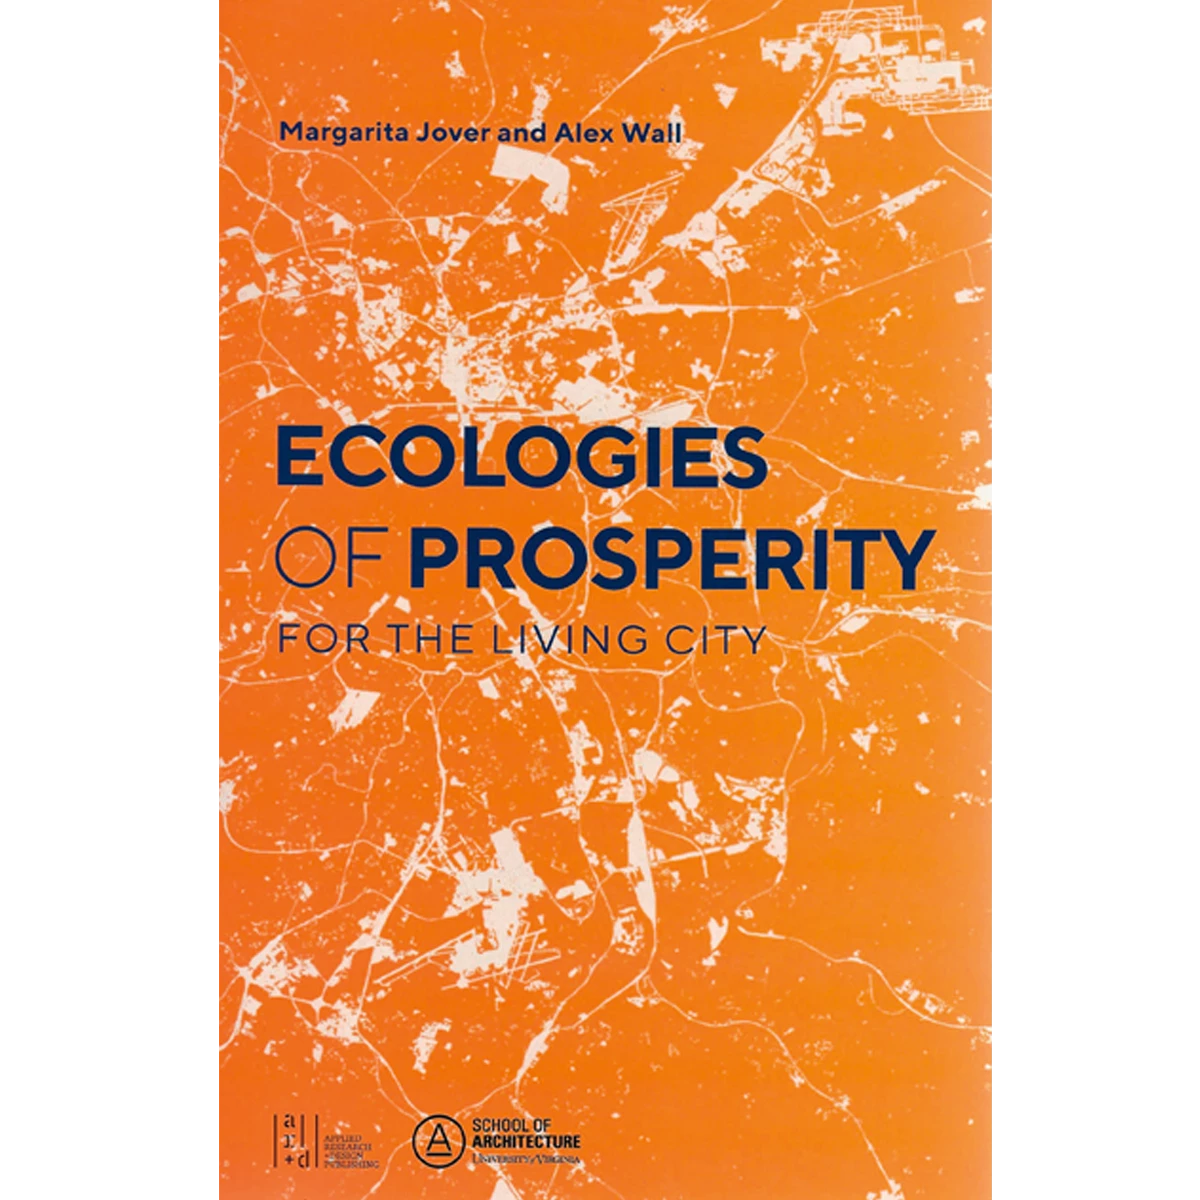 Ecologies of Prosperity for the Living City